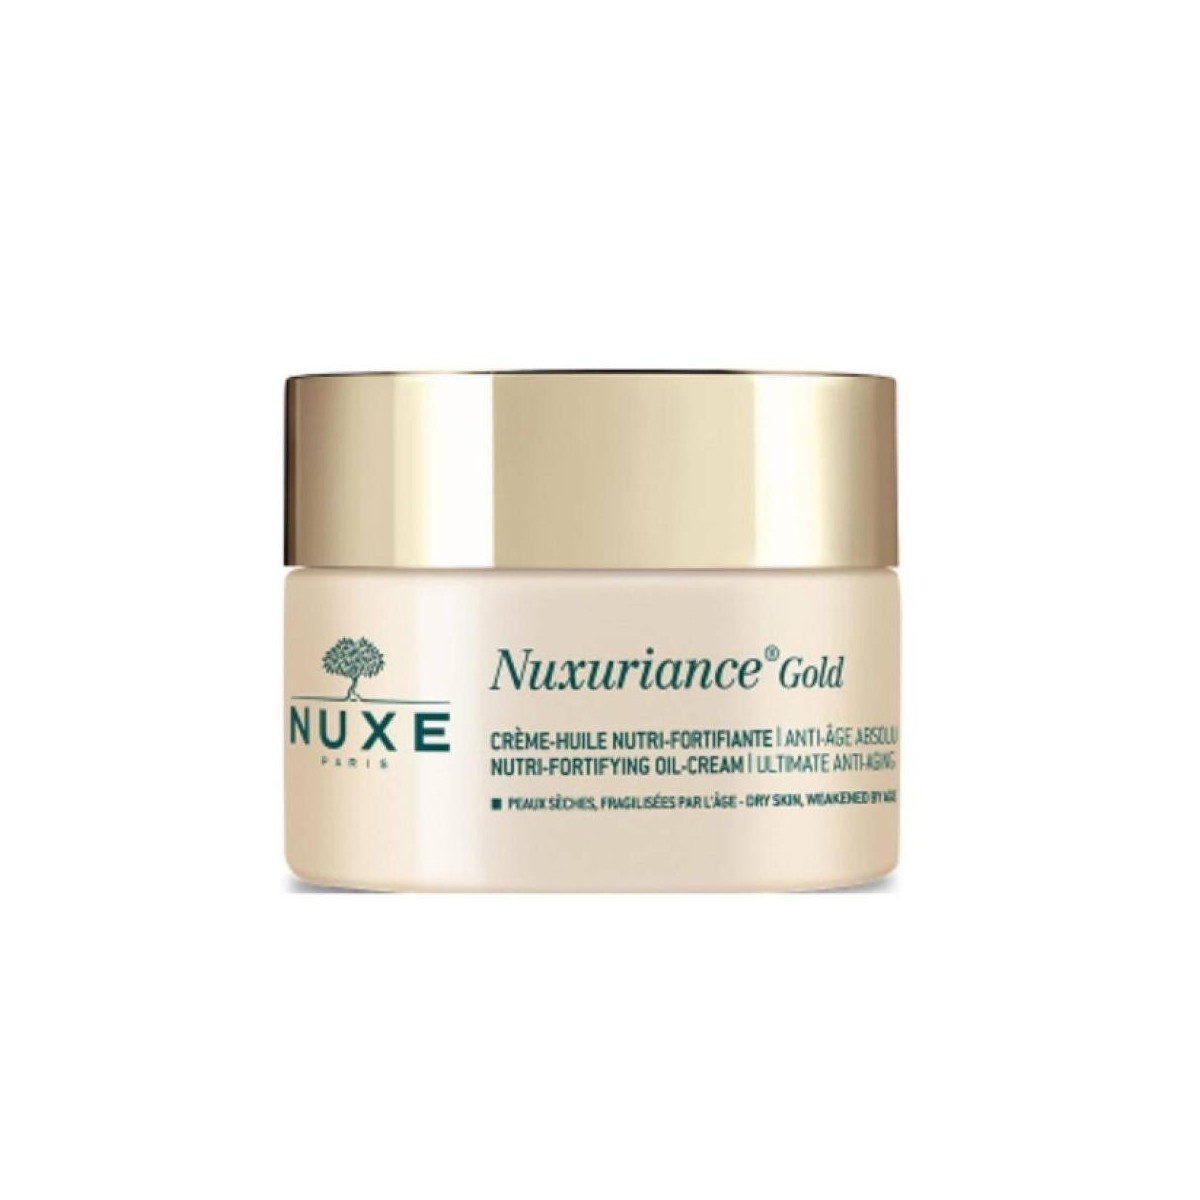 nuxe nuxuriance gold crema nutri fortificante 50ml